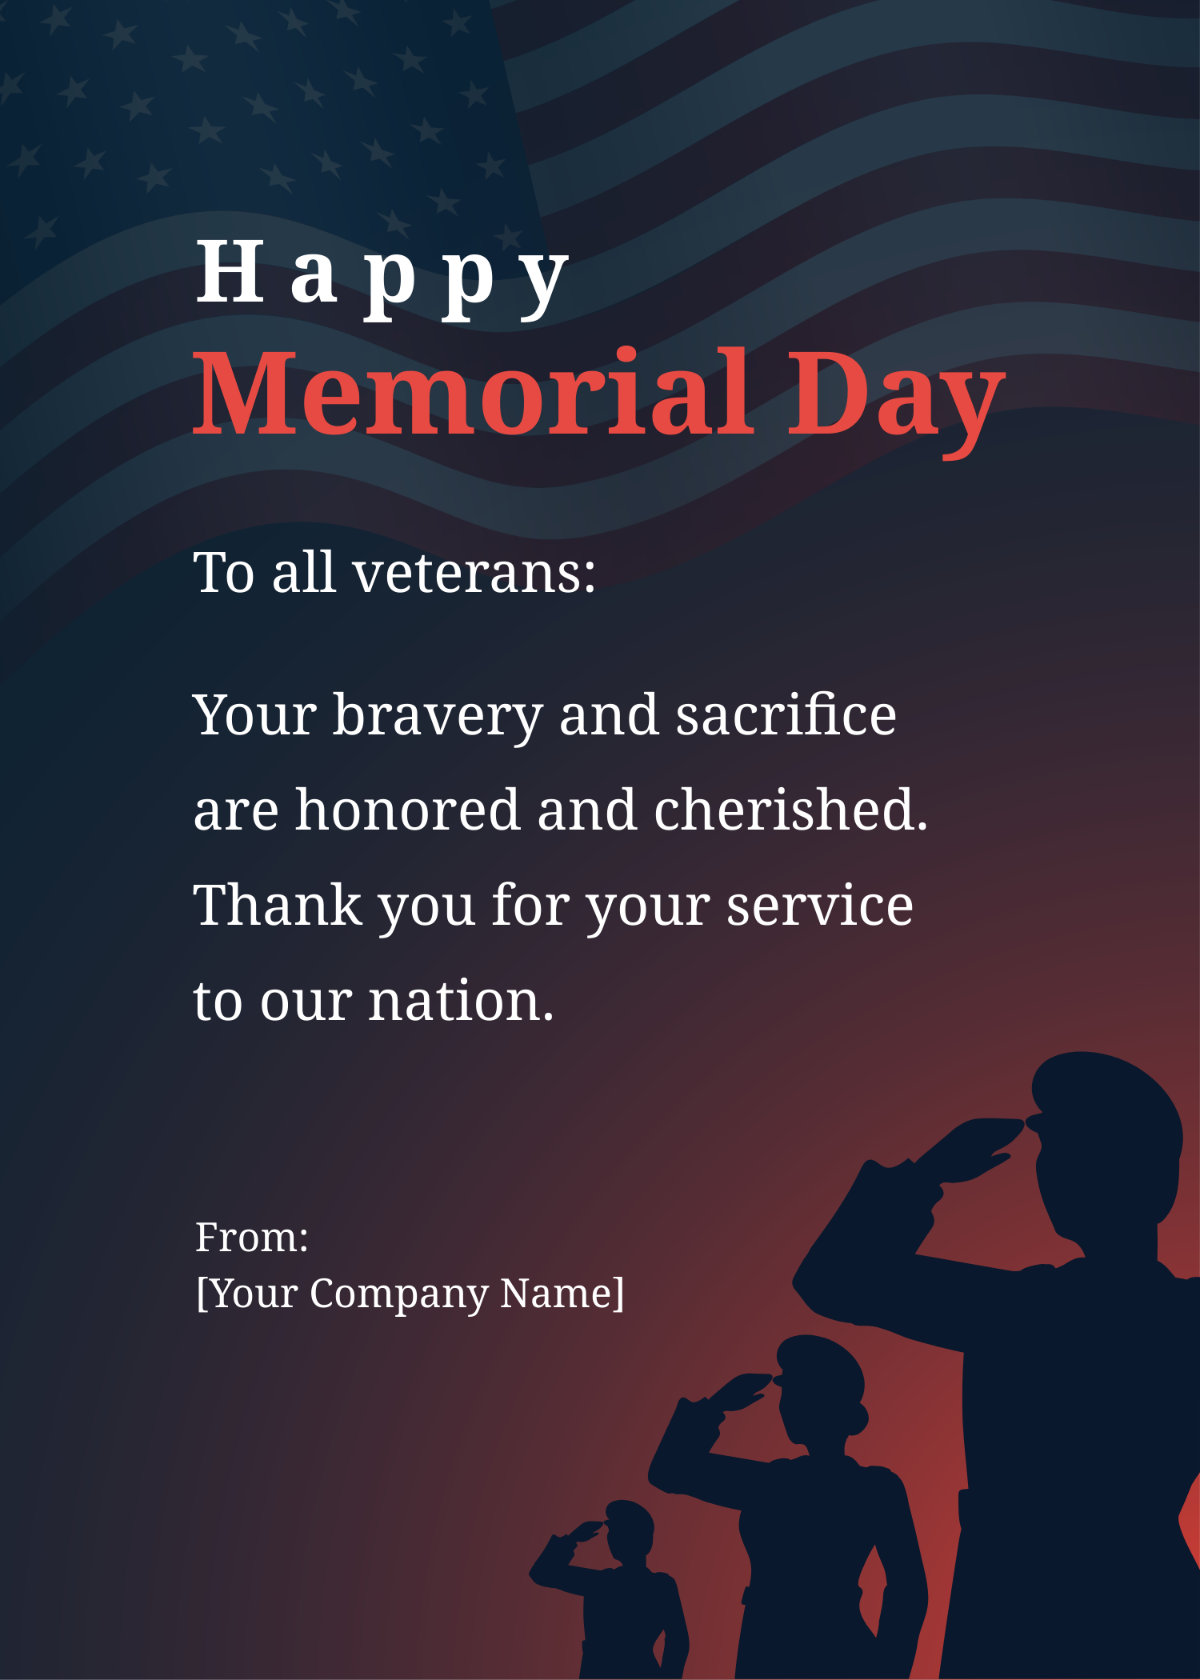 Memorial Day Message to Veterans